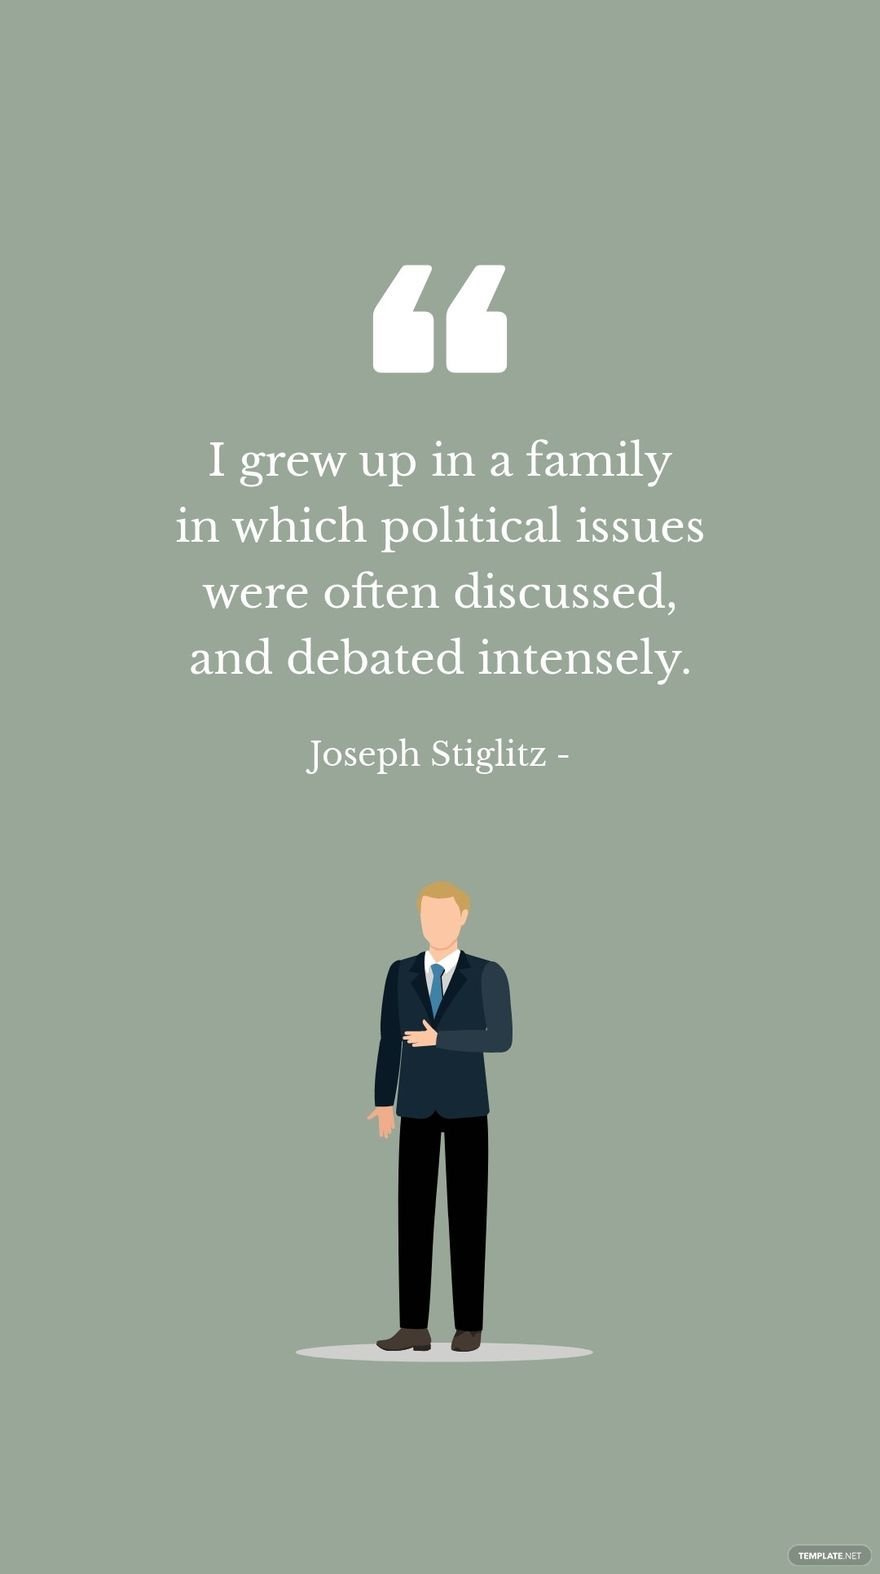 Joseph Stiglitz - I grew up in a family in which political issues were often discussed, and debated intensely. in JPG